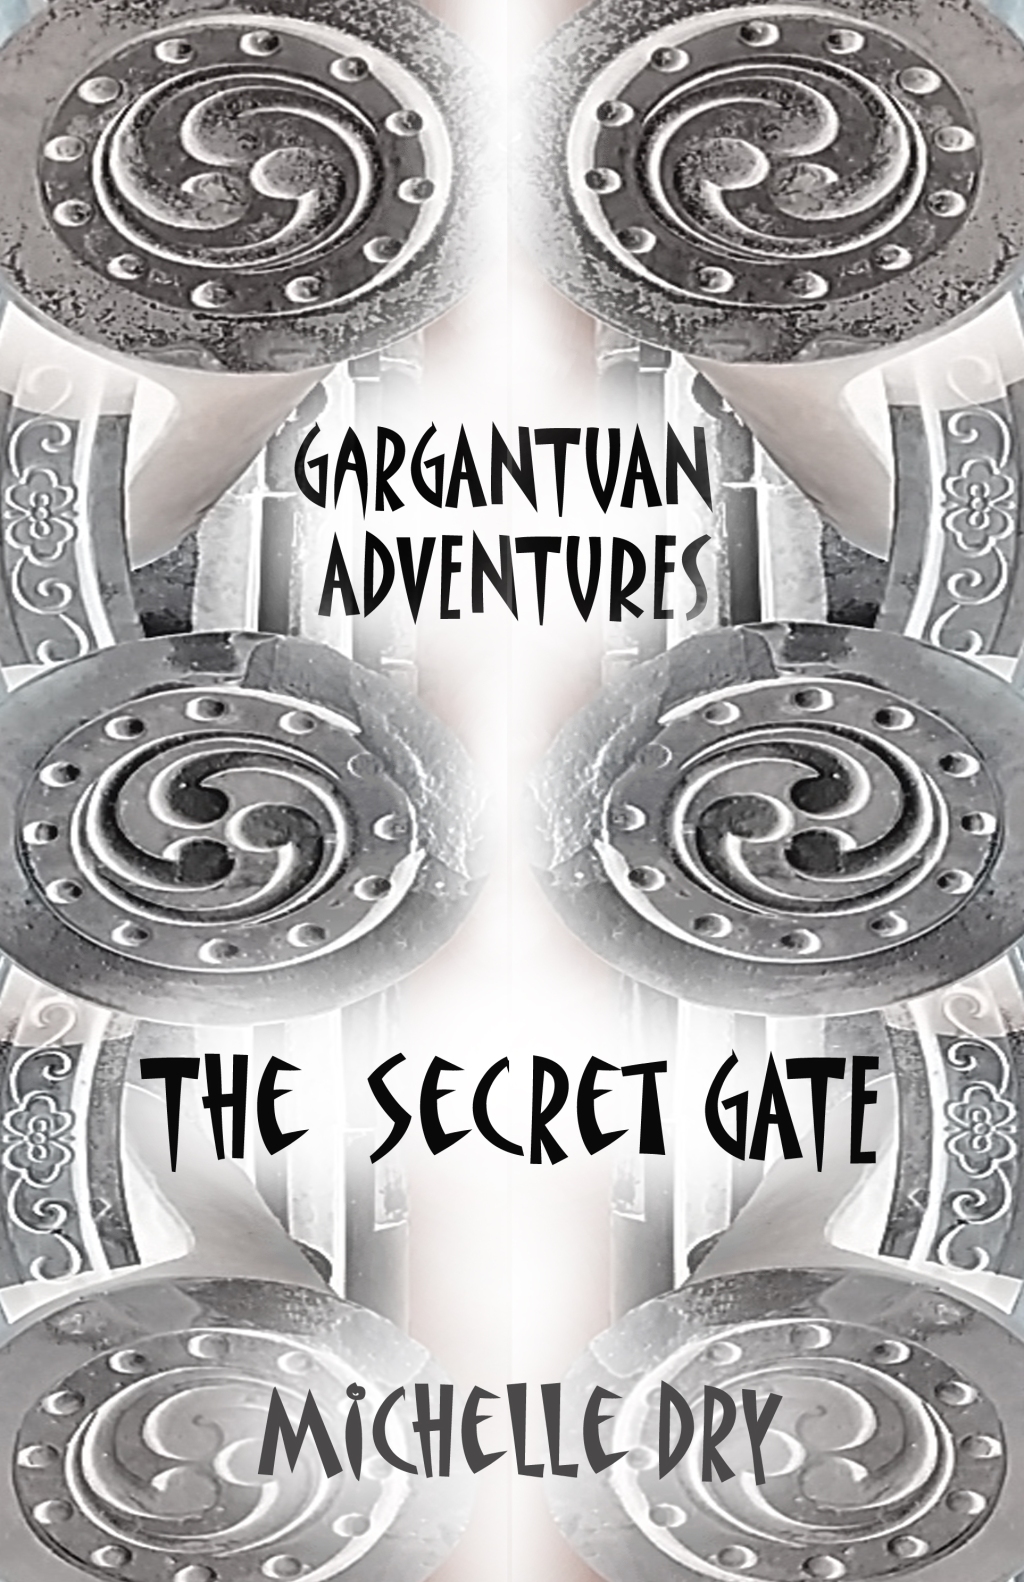 3 DAYS TO GO UNTIL GARGANTUAN ADVENTURES IS AVAILABLE ON AMAZON!